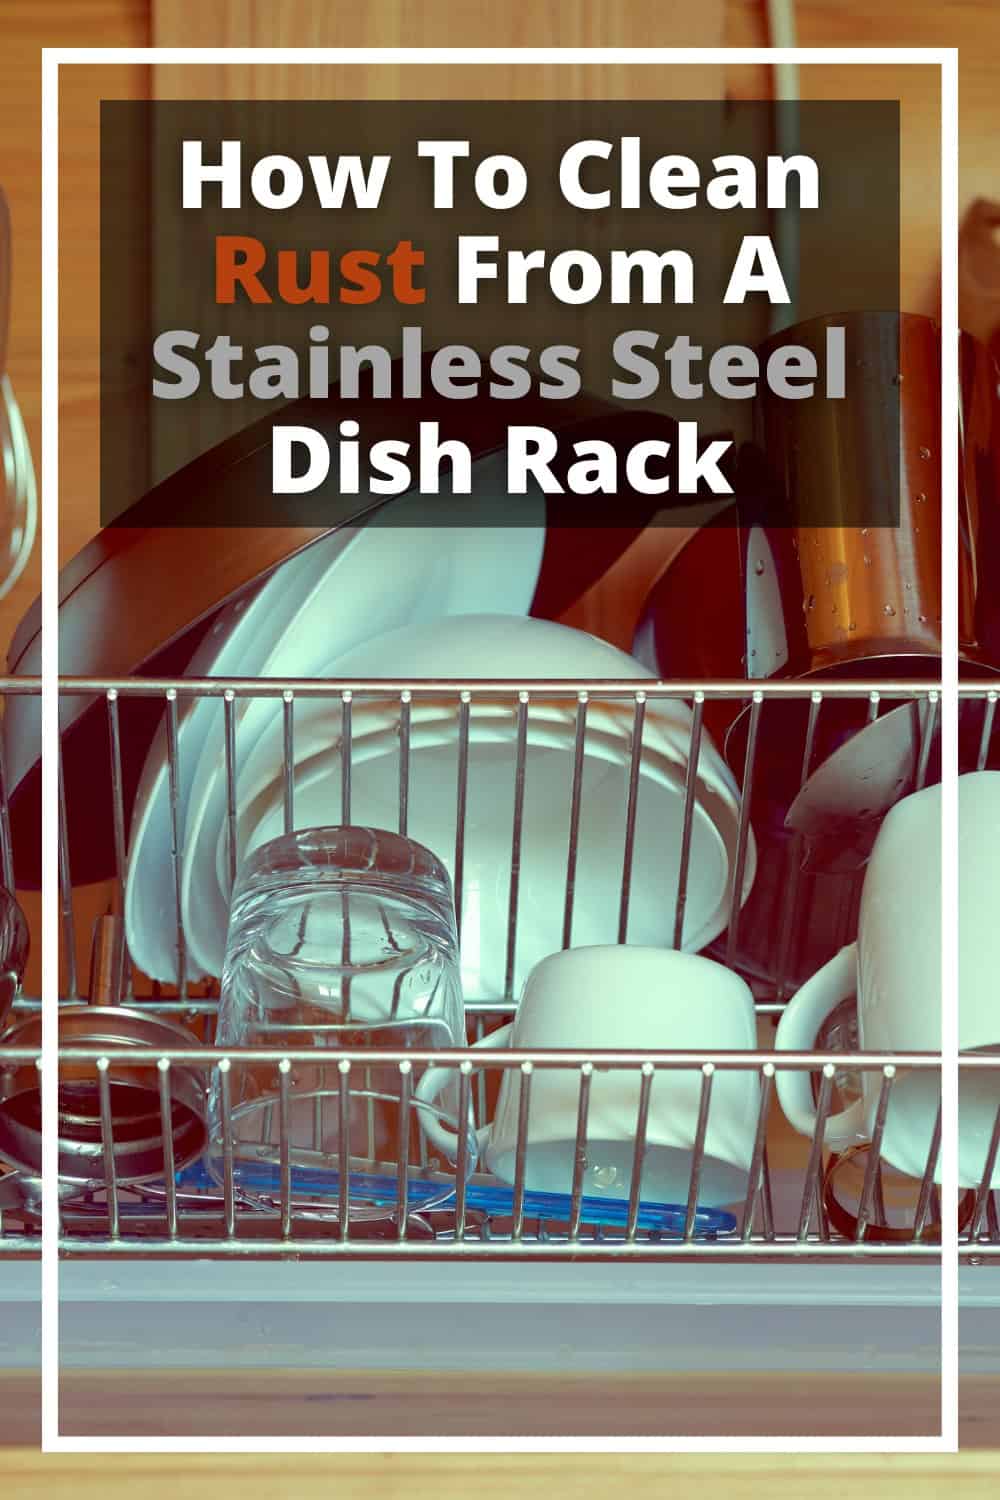 Clean rust from a stainless steel dish rack using all-natural products